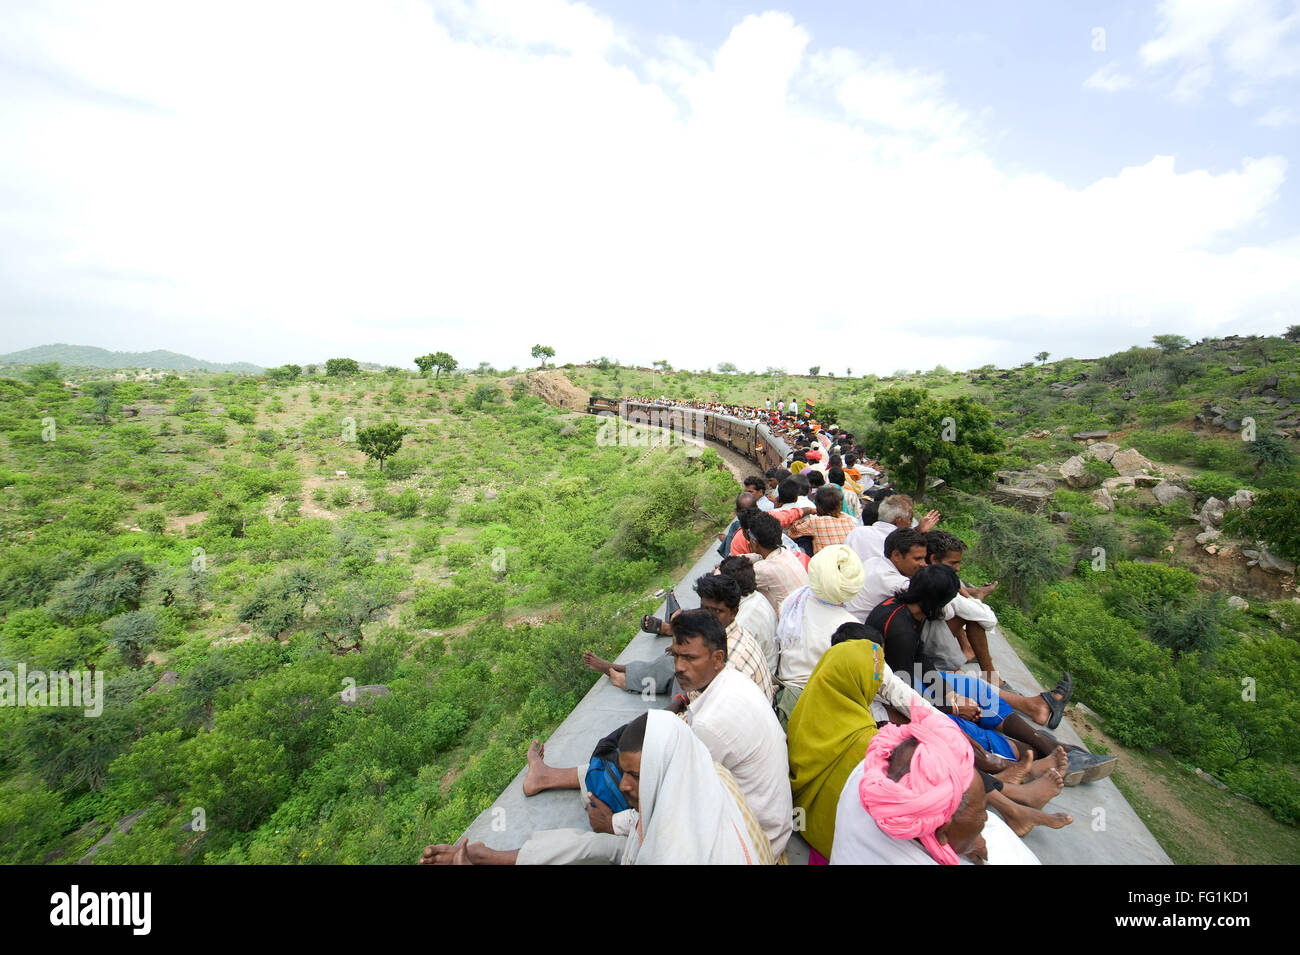 People sitting on train roof ; Rajasthan ; India NOMR Stock Photo